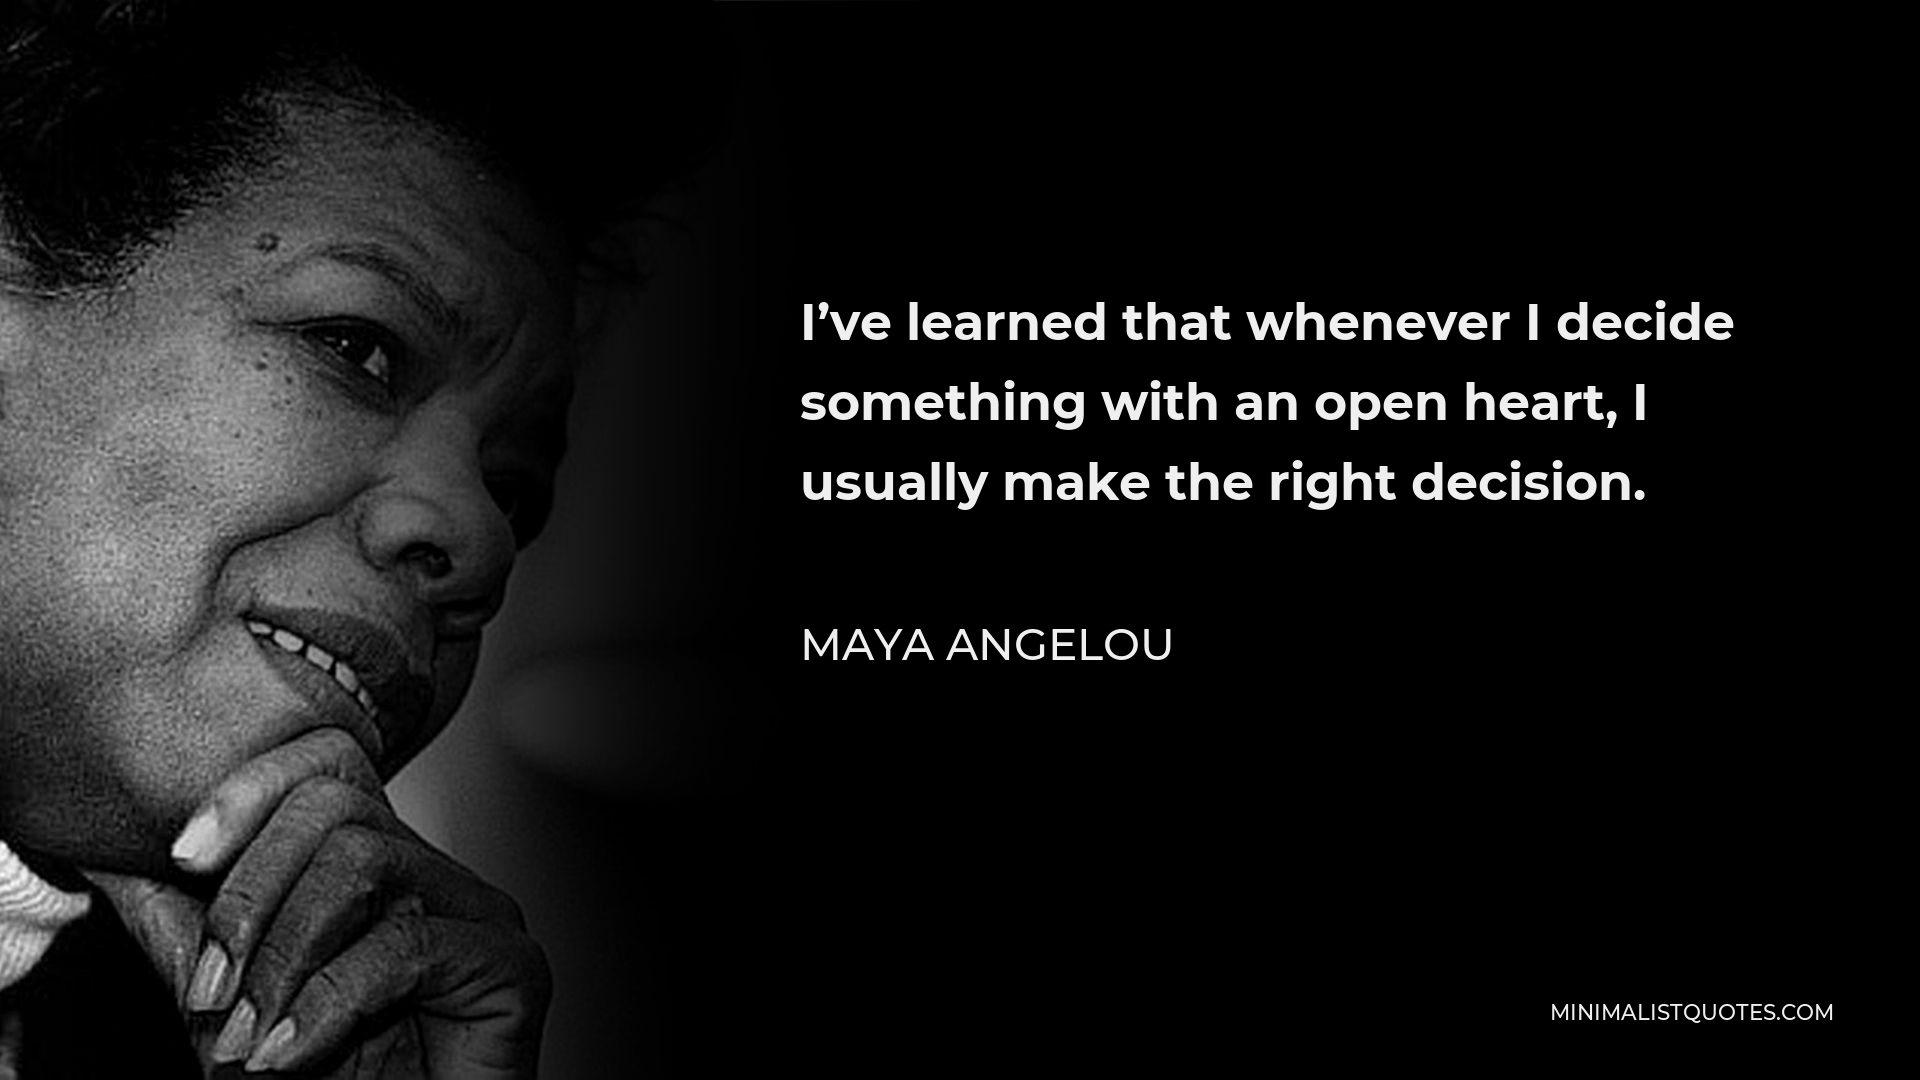 Maya Angelou Quote - I’ve learned that whenever I decide something with an open heart, I usually make the right decision.